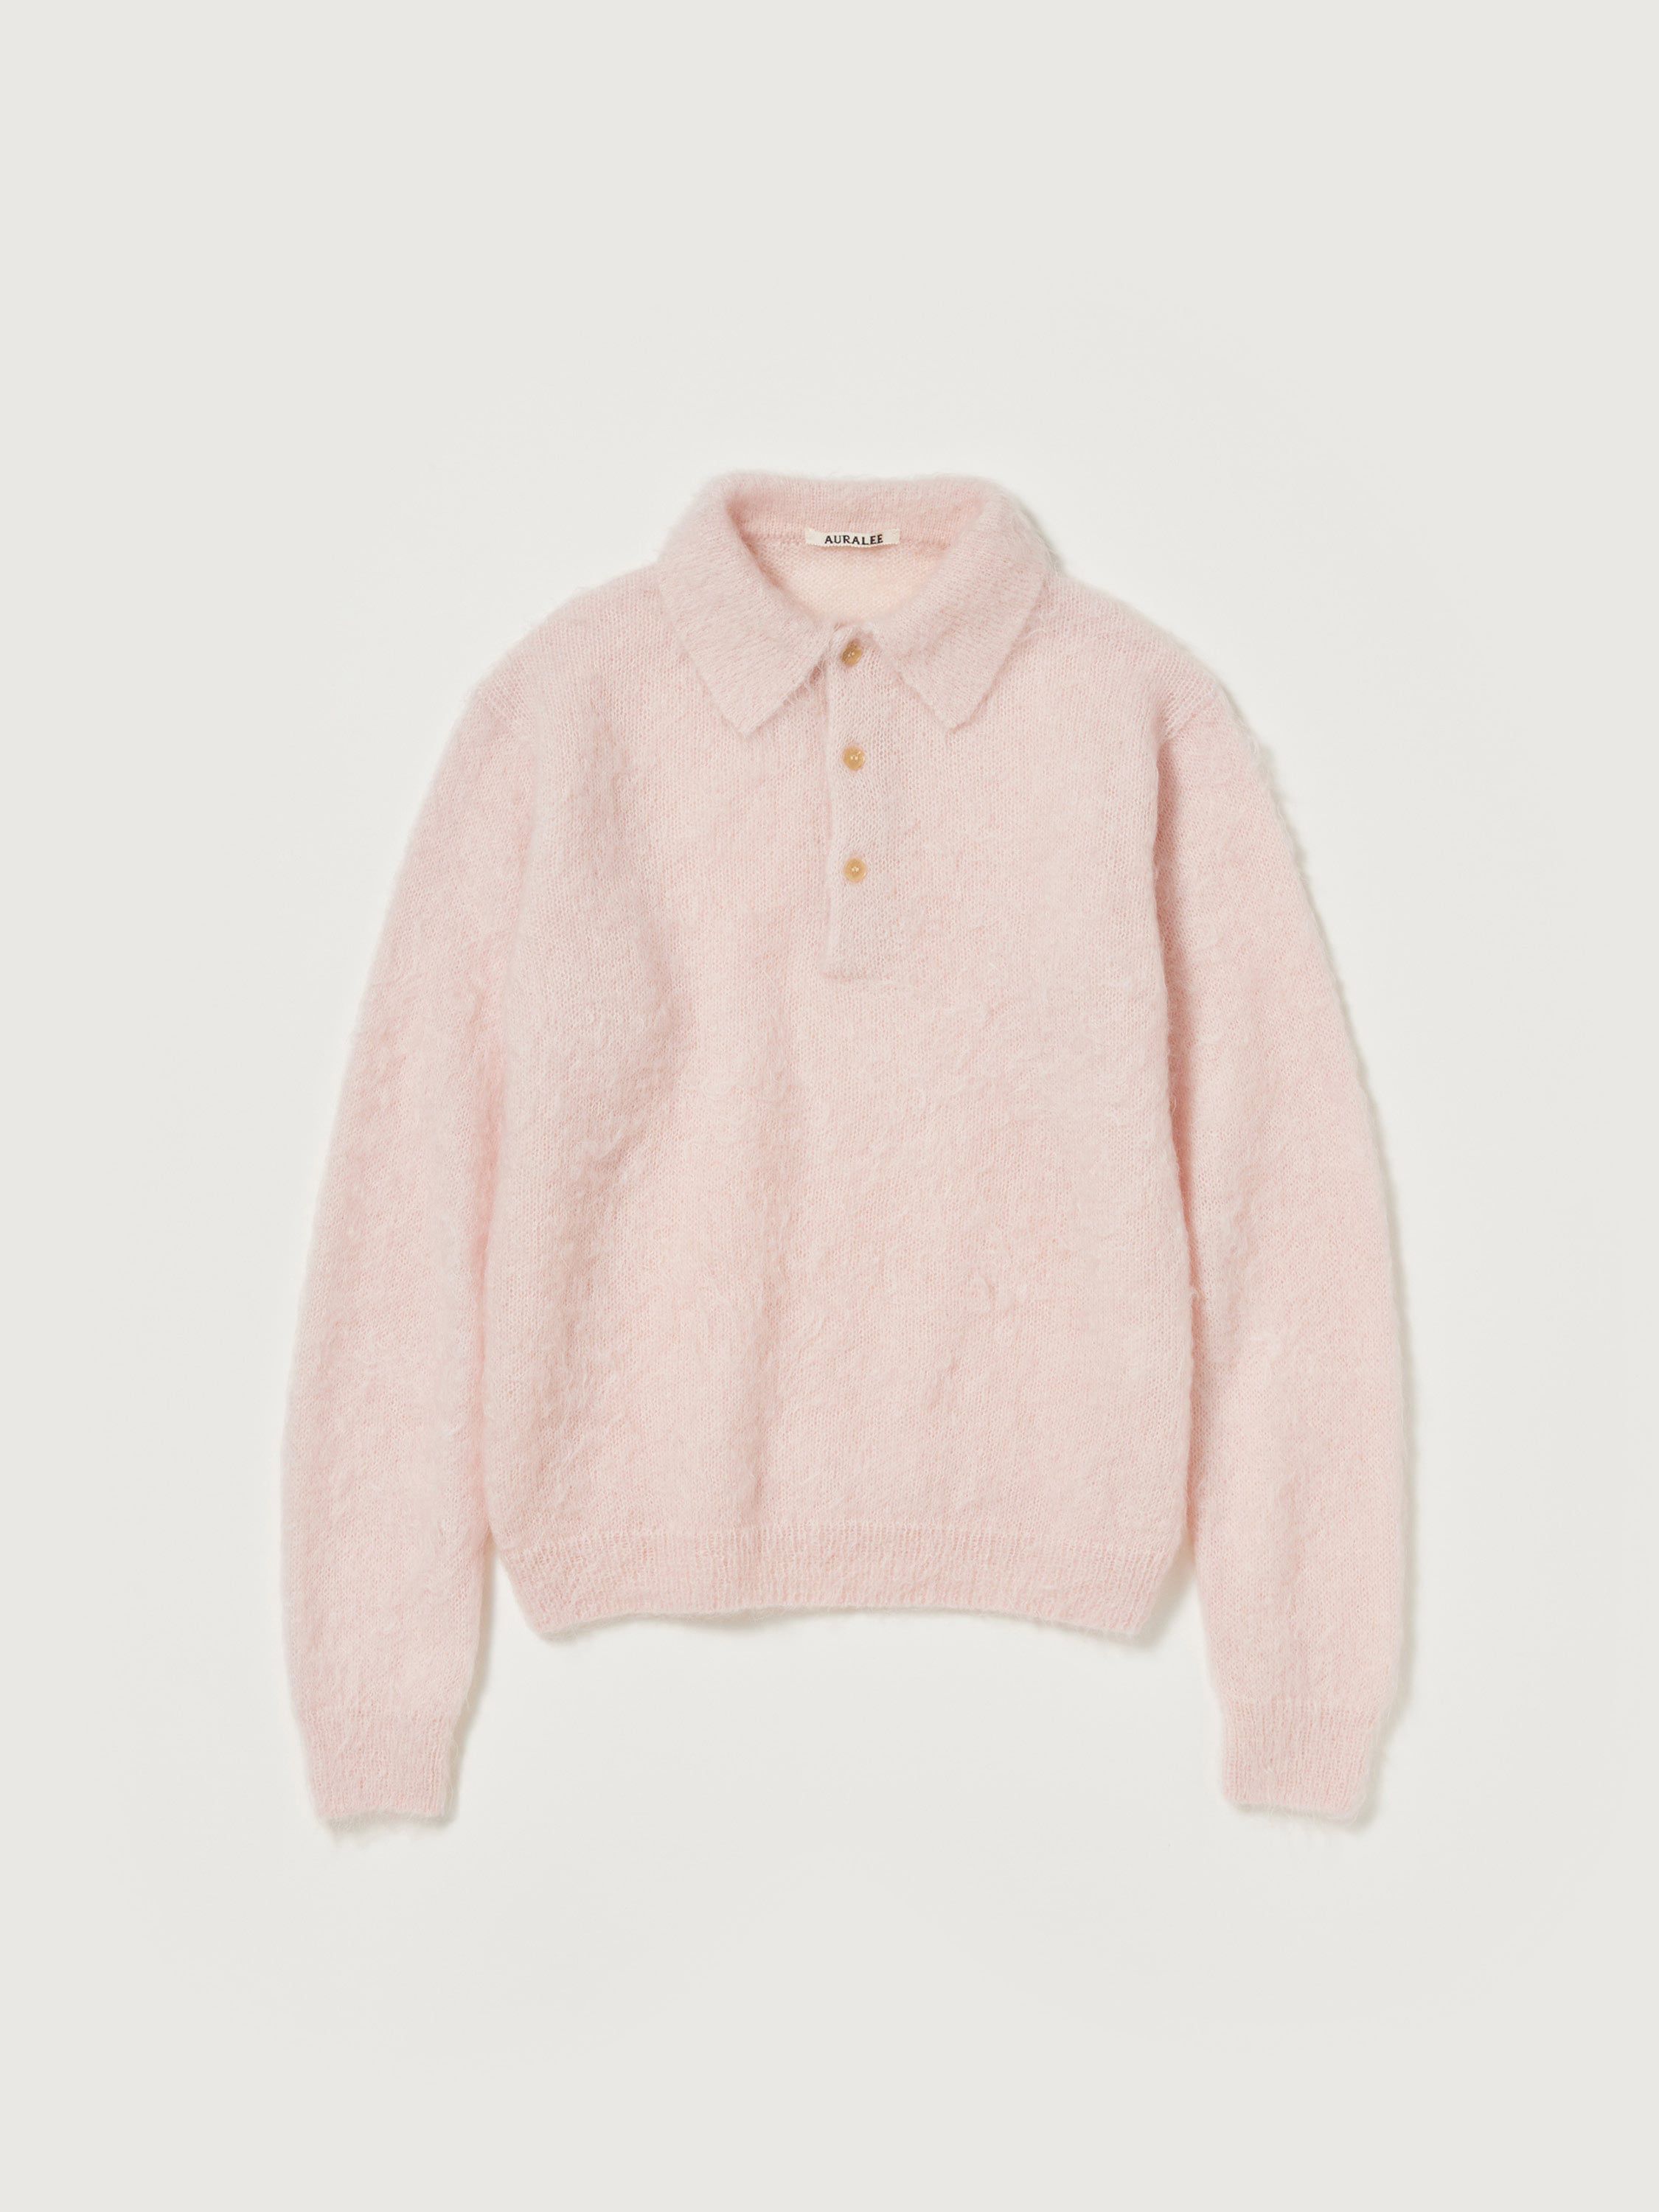 BRUSHED SUPER KID MOHAIR KNIT POLO 詳細画像 LIGHT PINK 4